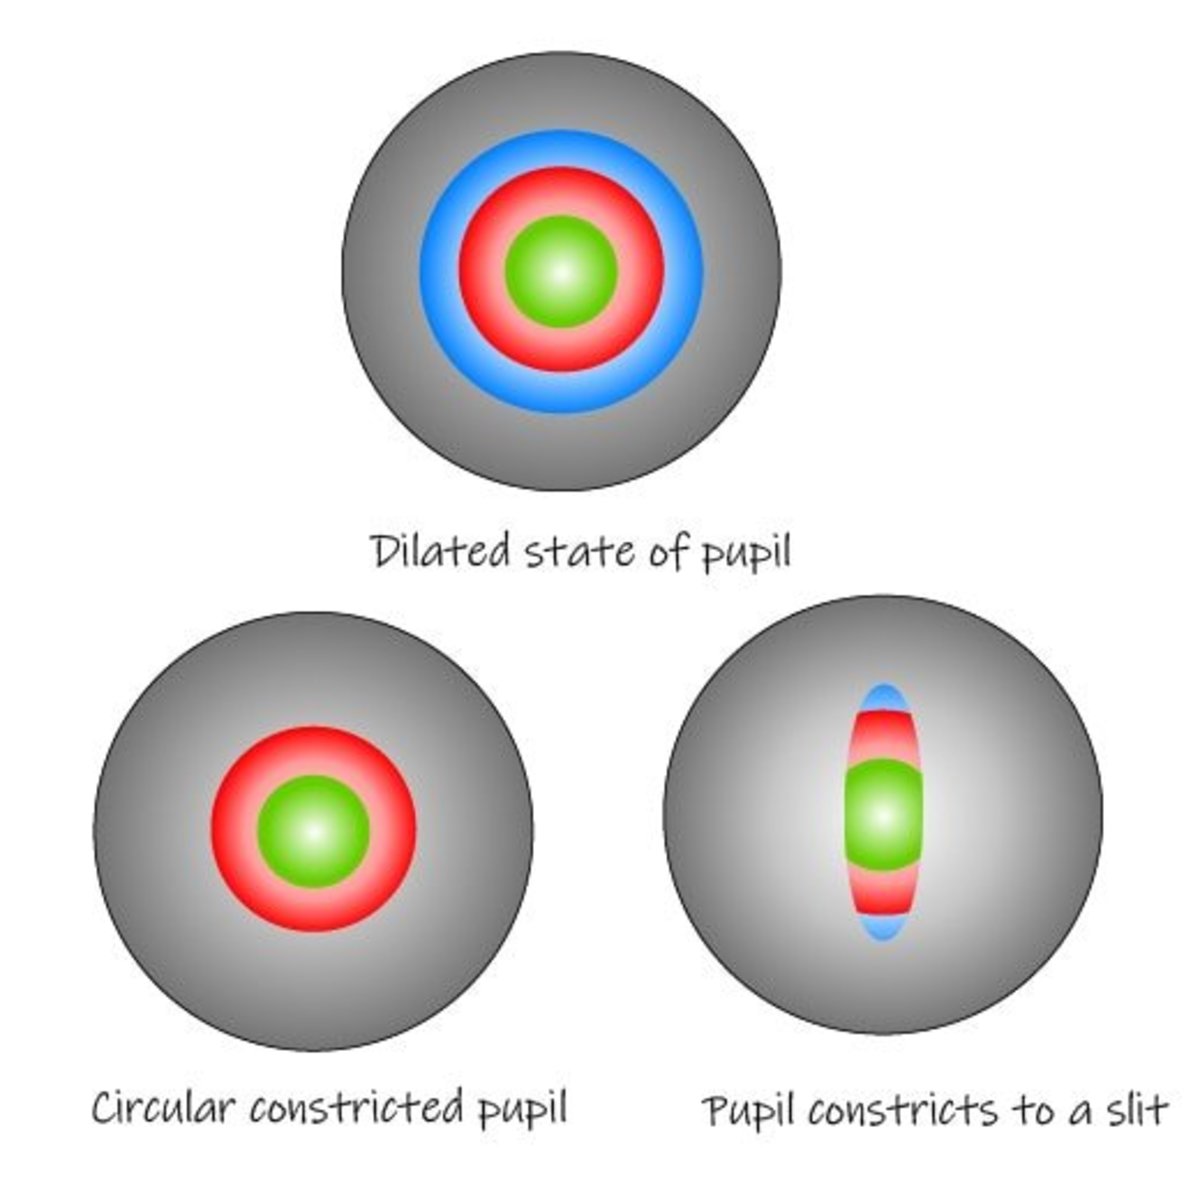 Unlike a circular pupil that loses focus on the outer zone as it constricts, a slit pupil allows light to pass through all zones irrespective of constriction state.